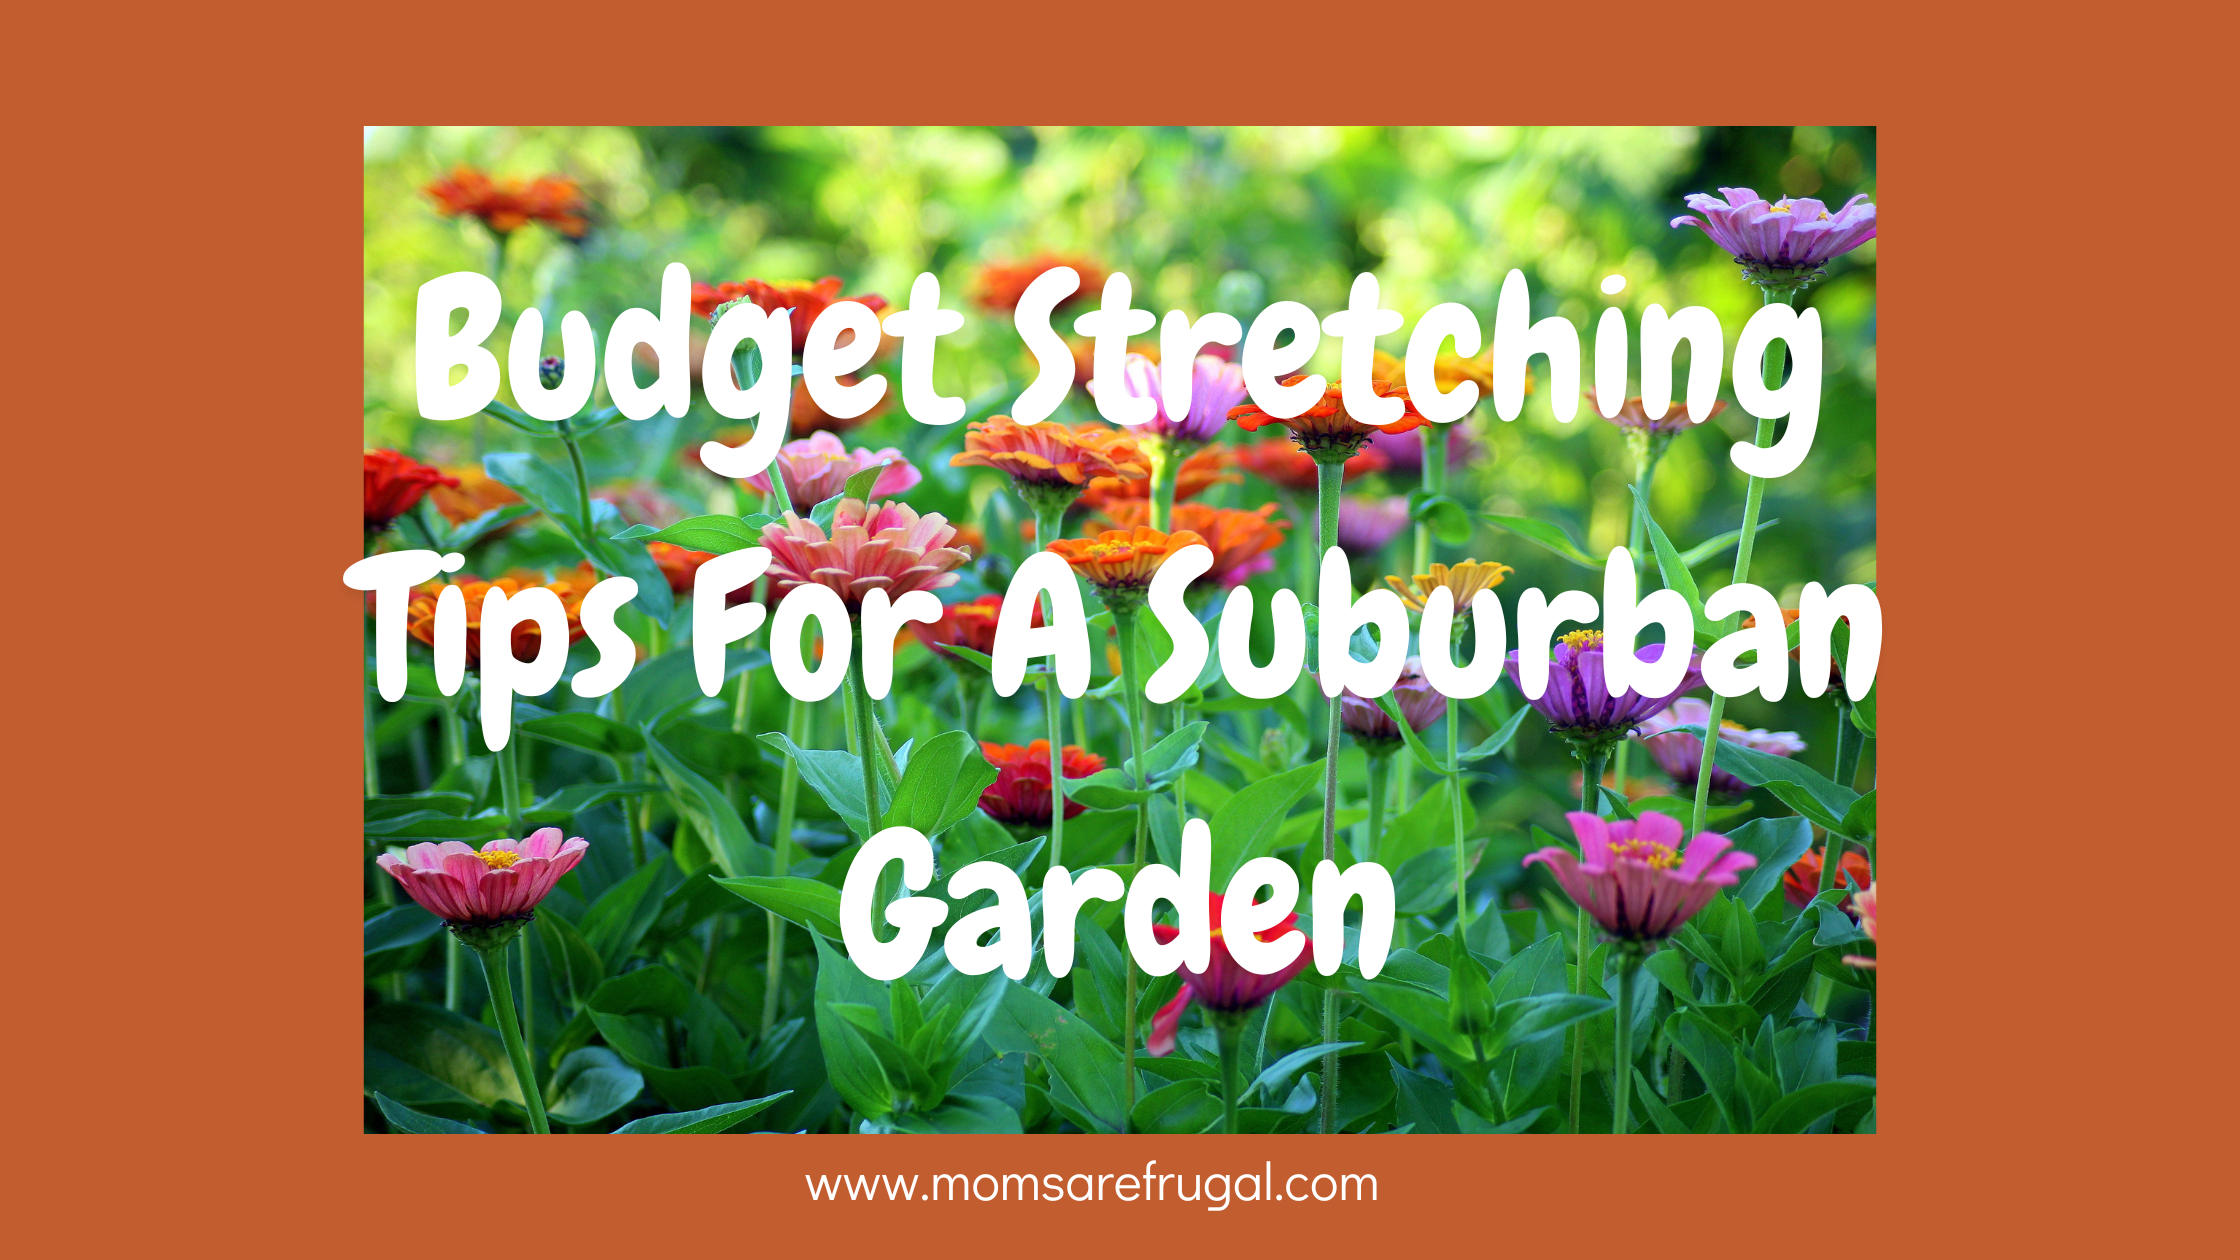 Budget Stretching Tips For A Suburban Garden